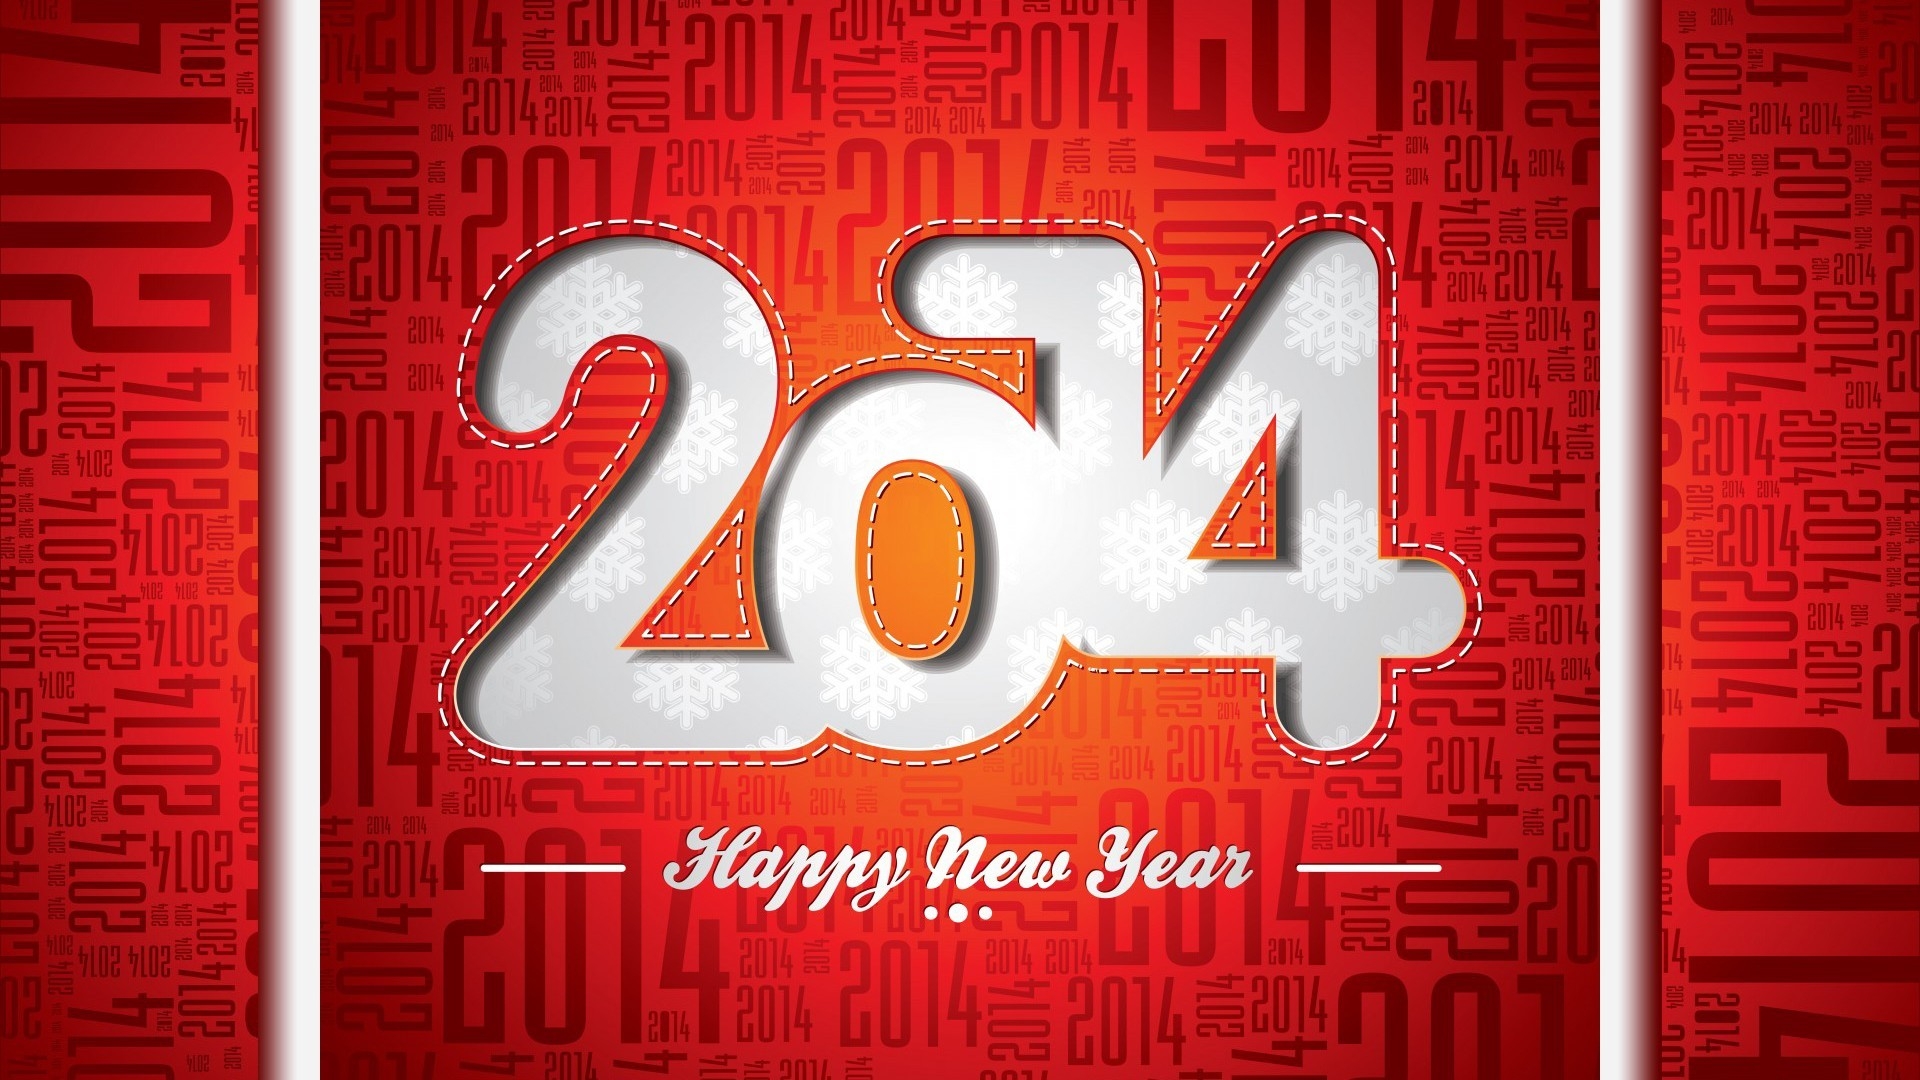 Happy New Year 2014 for 1920 x 1080 HDTV 1080p resolution